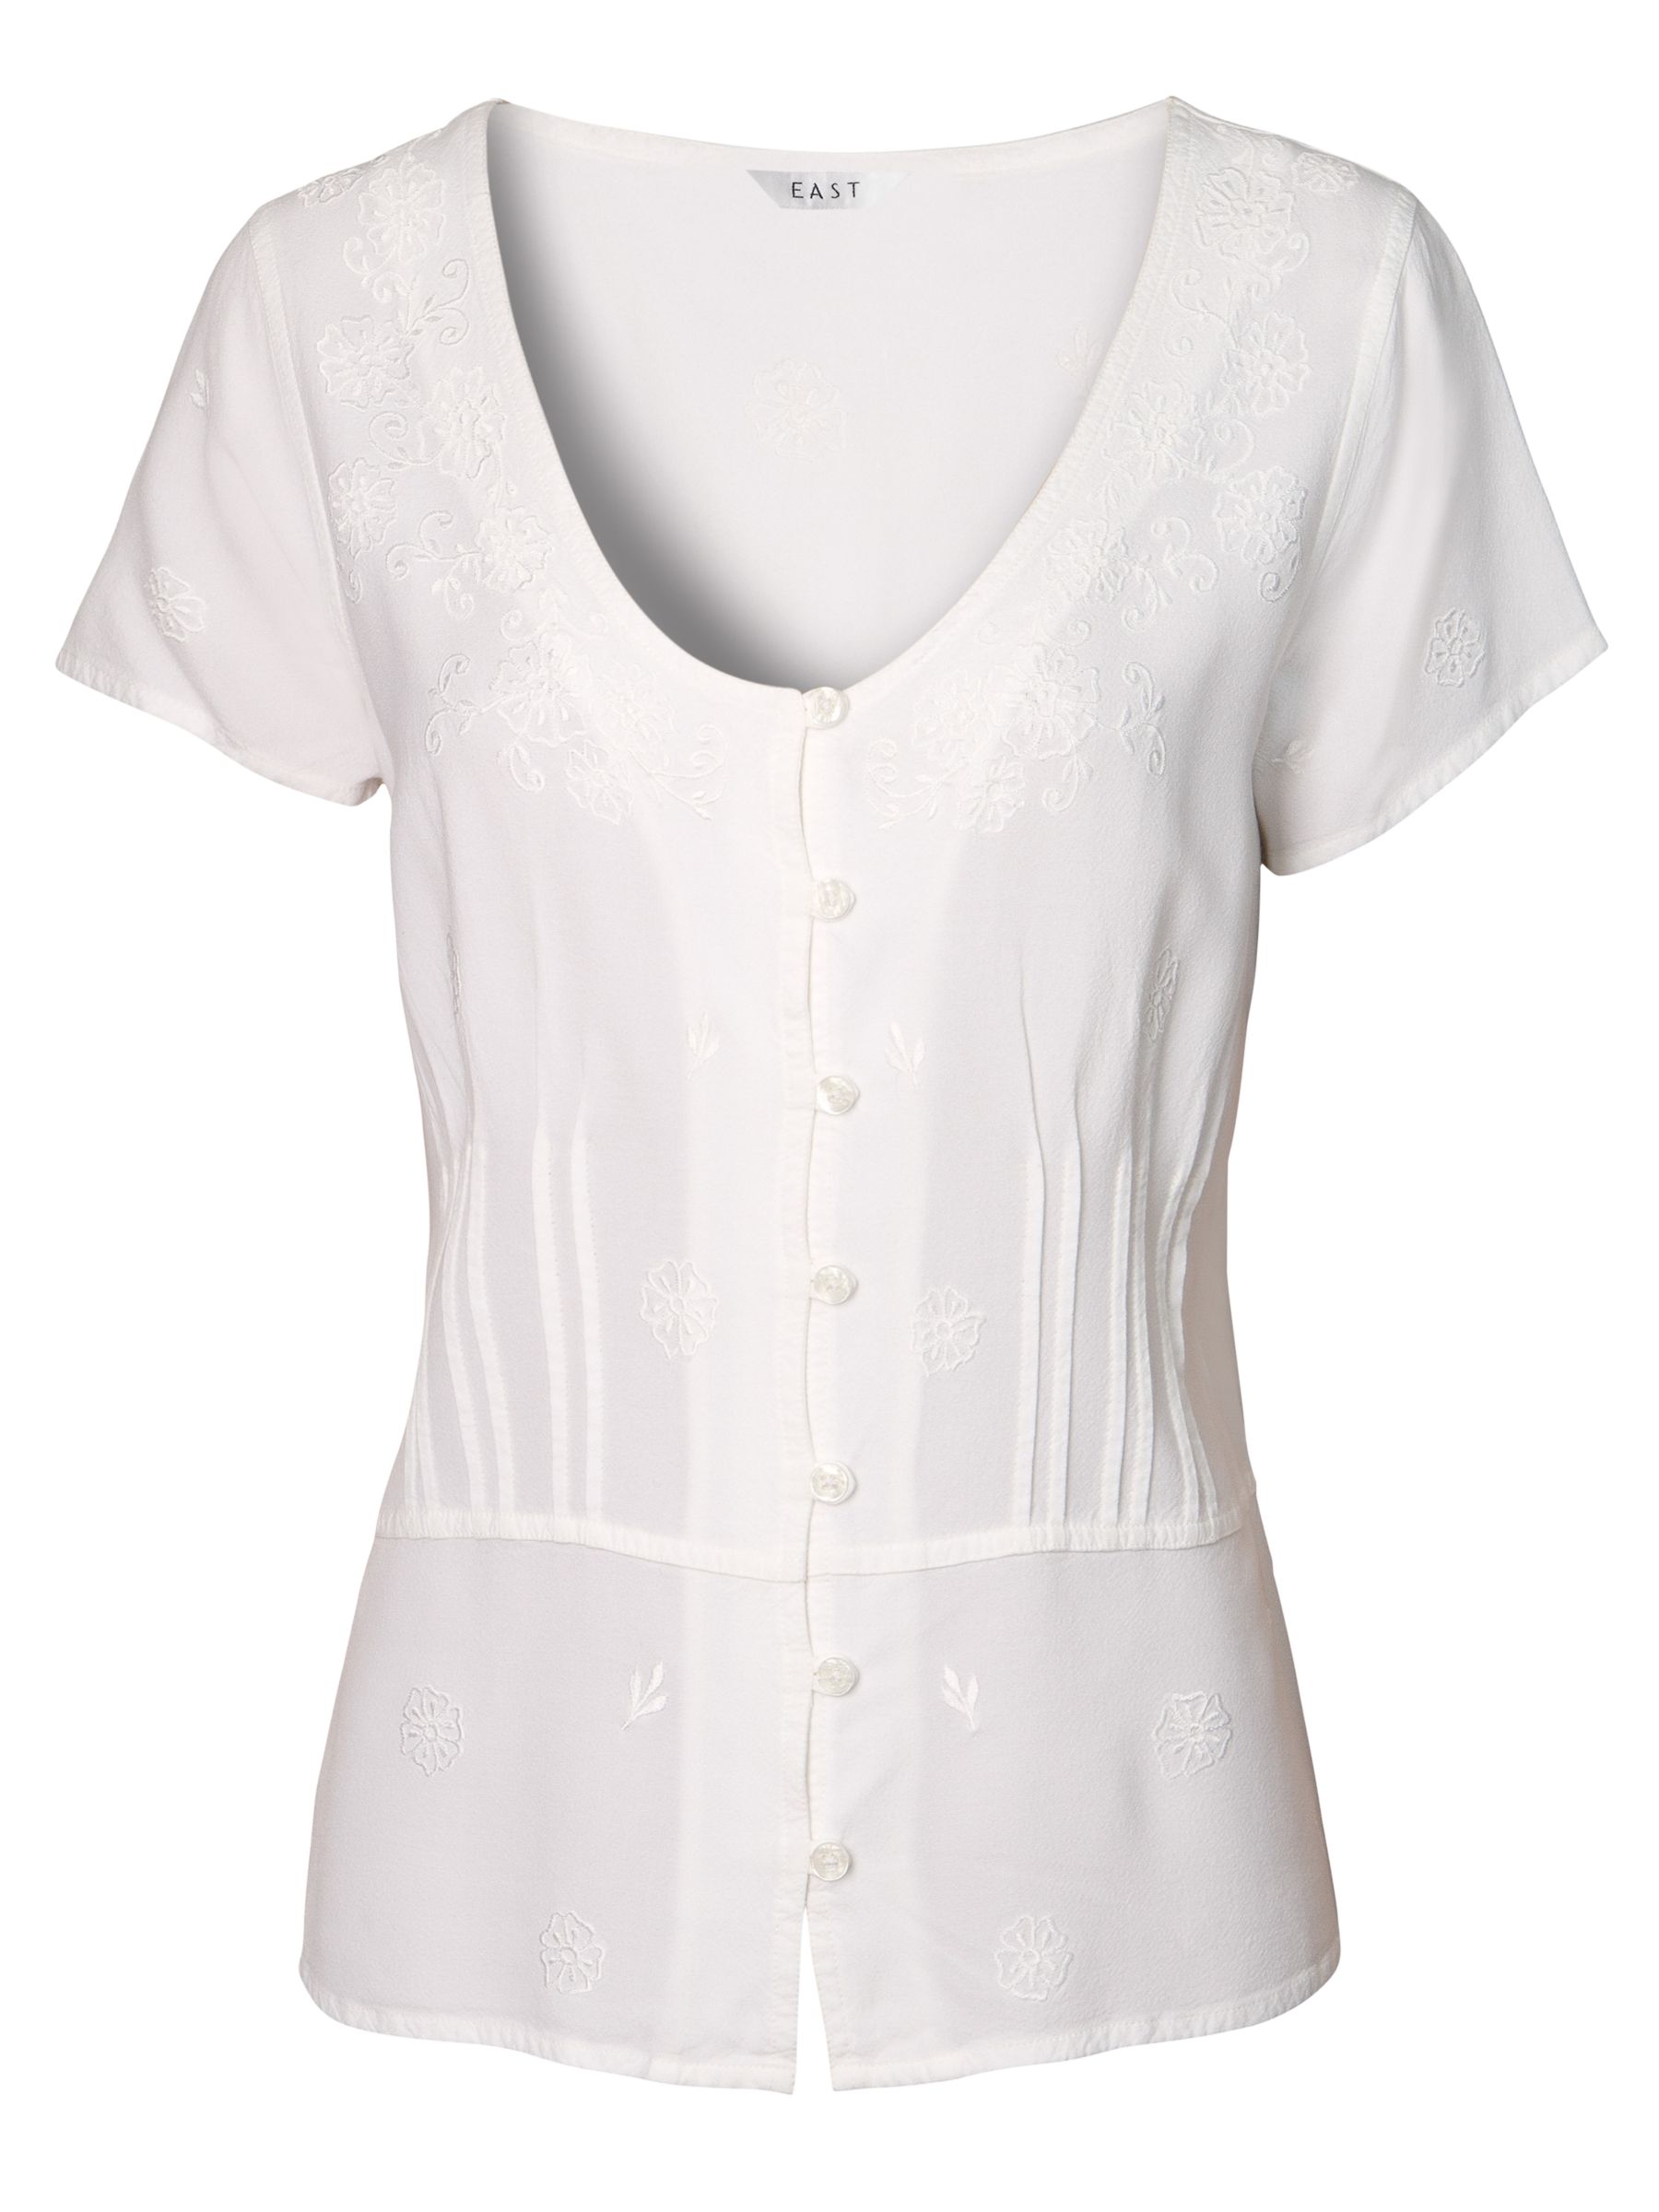 East Vintage Charm Distressed Blouse, White